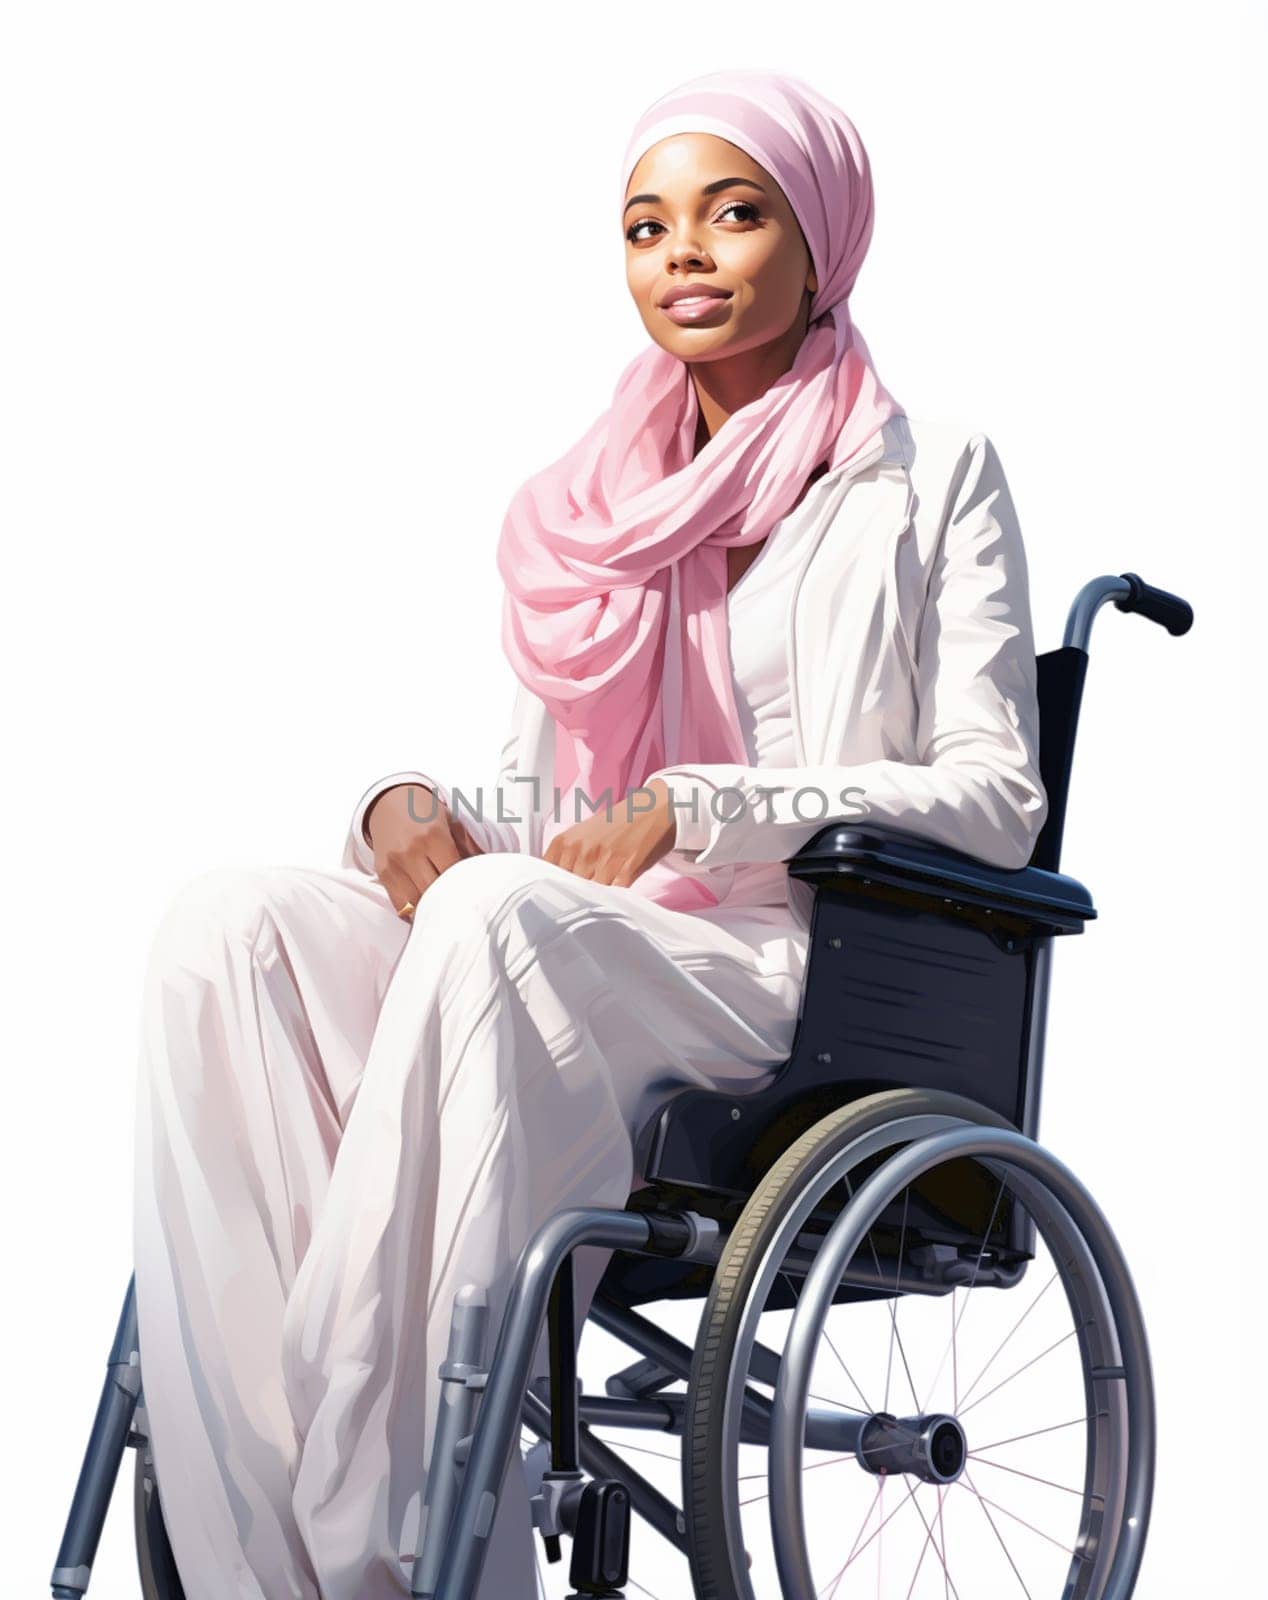 Female Muslim patient in a wheelchair, she was happy and relaxed in the hospital examination room by Andelov13